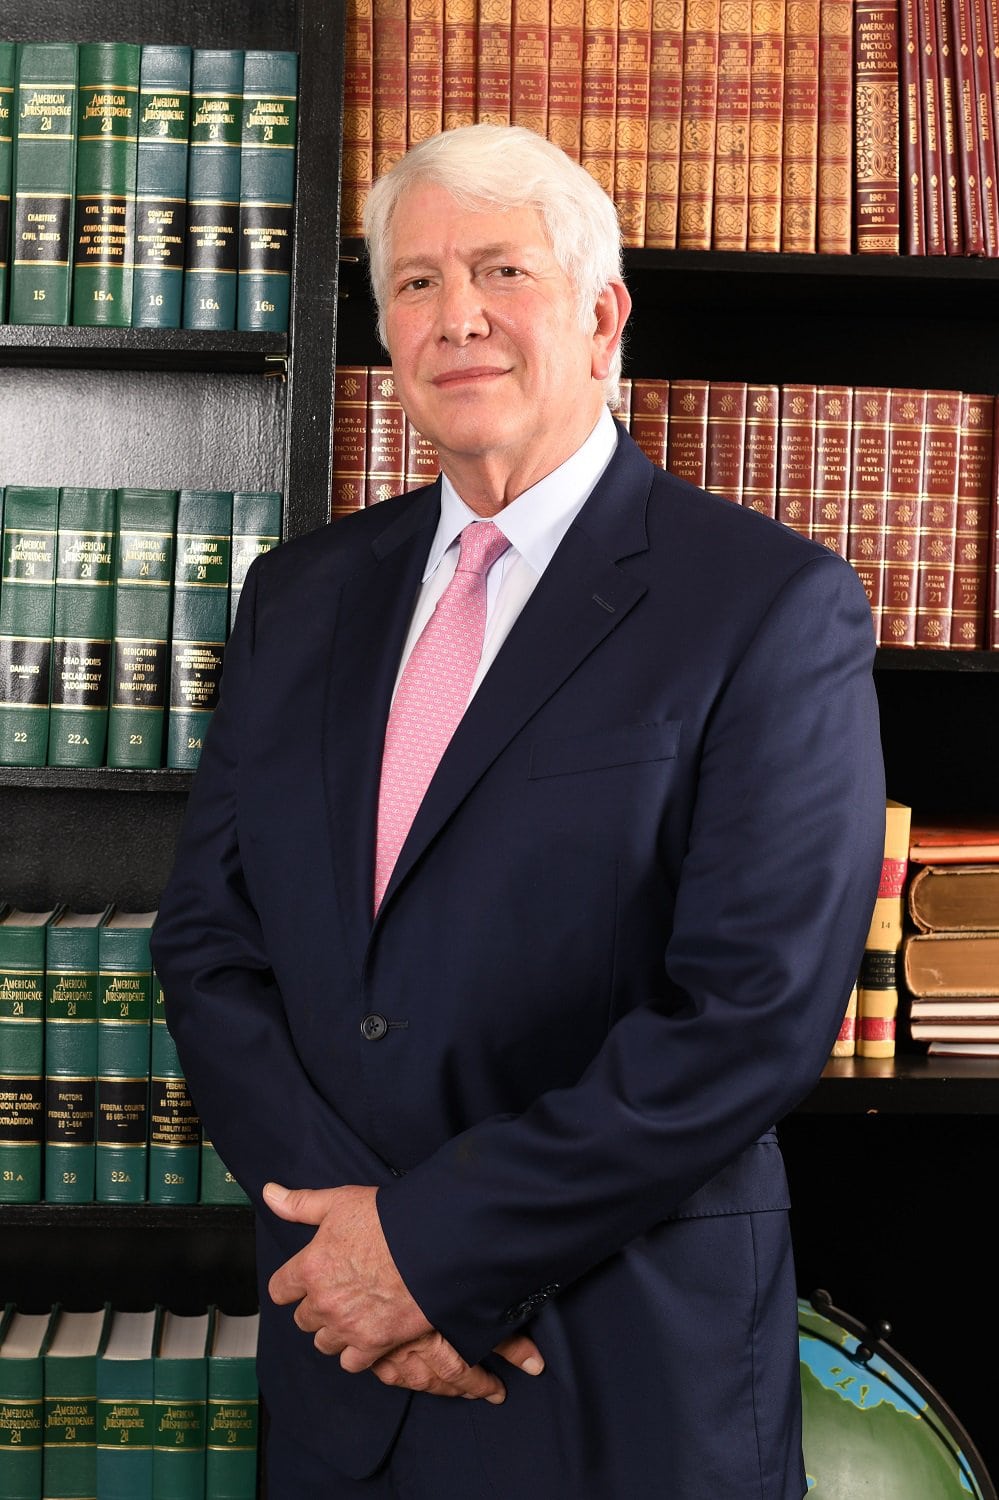 Portrait of a man representing R&G Personal Injury Lawyers, emphasizing the team's professionalism and expertise. The image is contextualized within the page by highlighting 'Our Attorneys,' providing a glimpse into the skilled legal professionals associated with the firm.